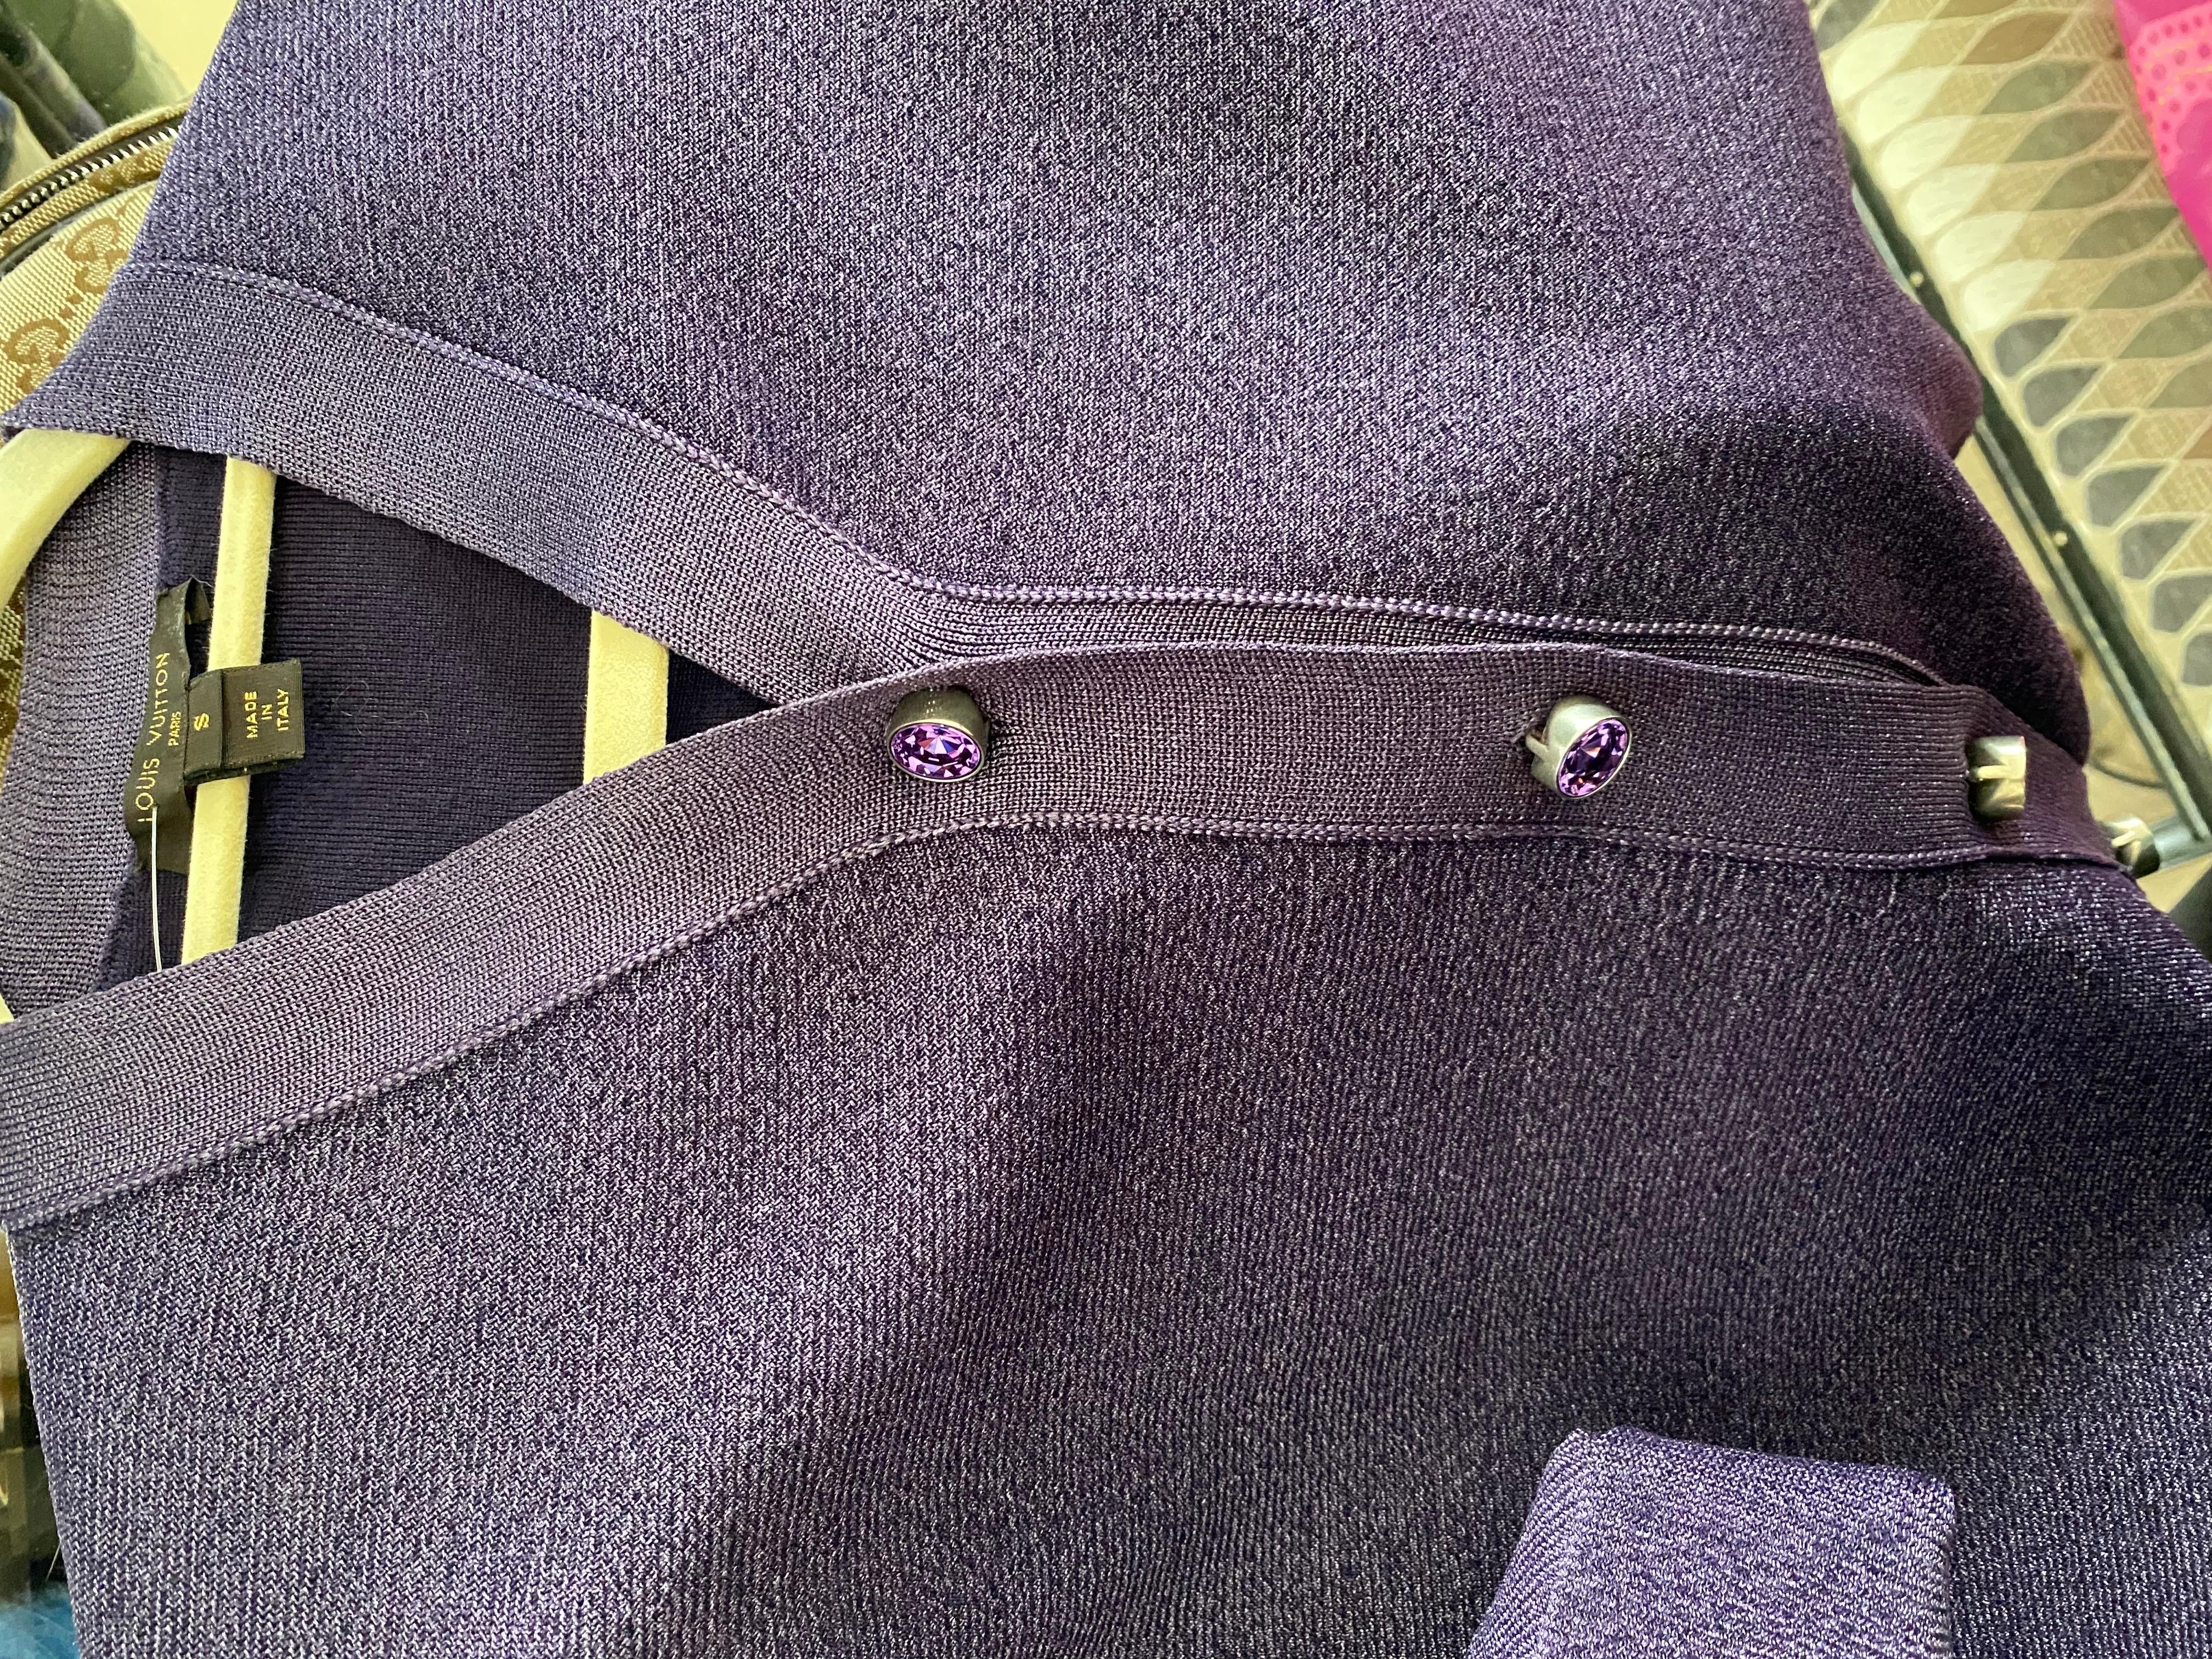 Louis Vuitton Purple Metallic Cardigan with Rhinestone Buttons – S In Excellent Condition For Sale In West Palm Beach, FL